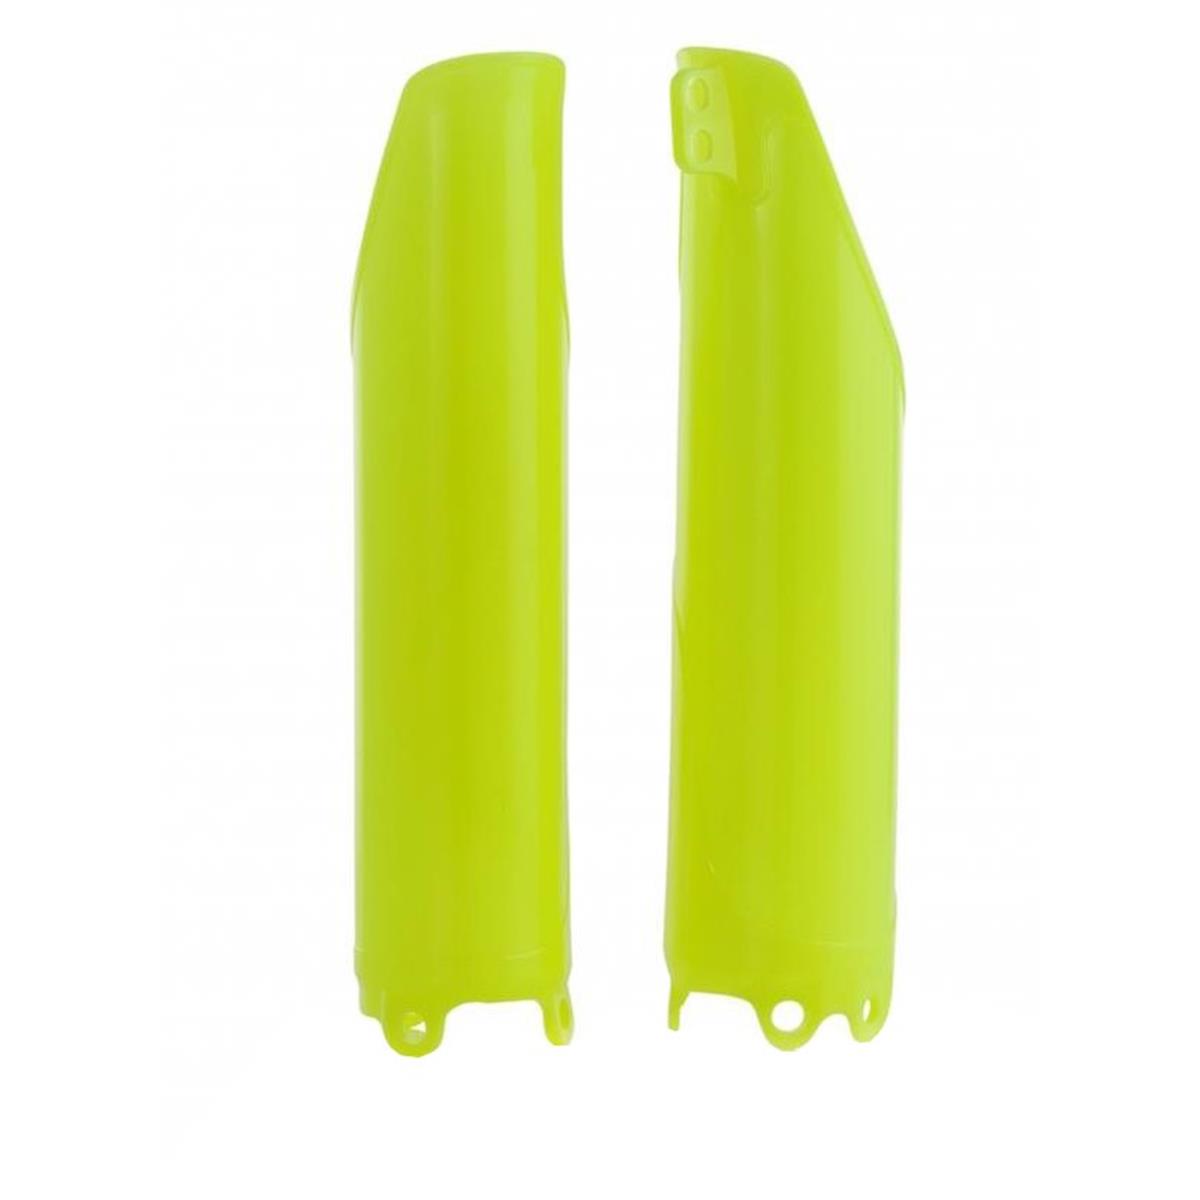 Acerbis Lower Fork Covers  Honda CRF 250 2018, CRF 450 17-18, Fluo Yellow